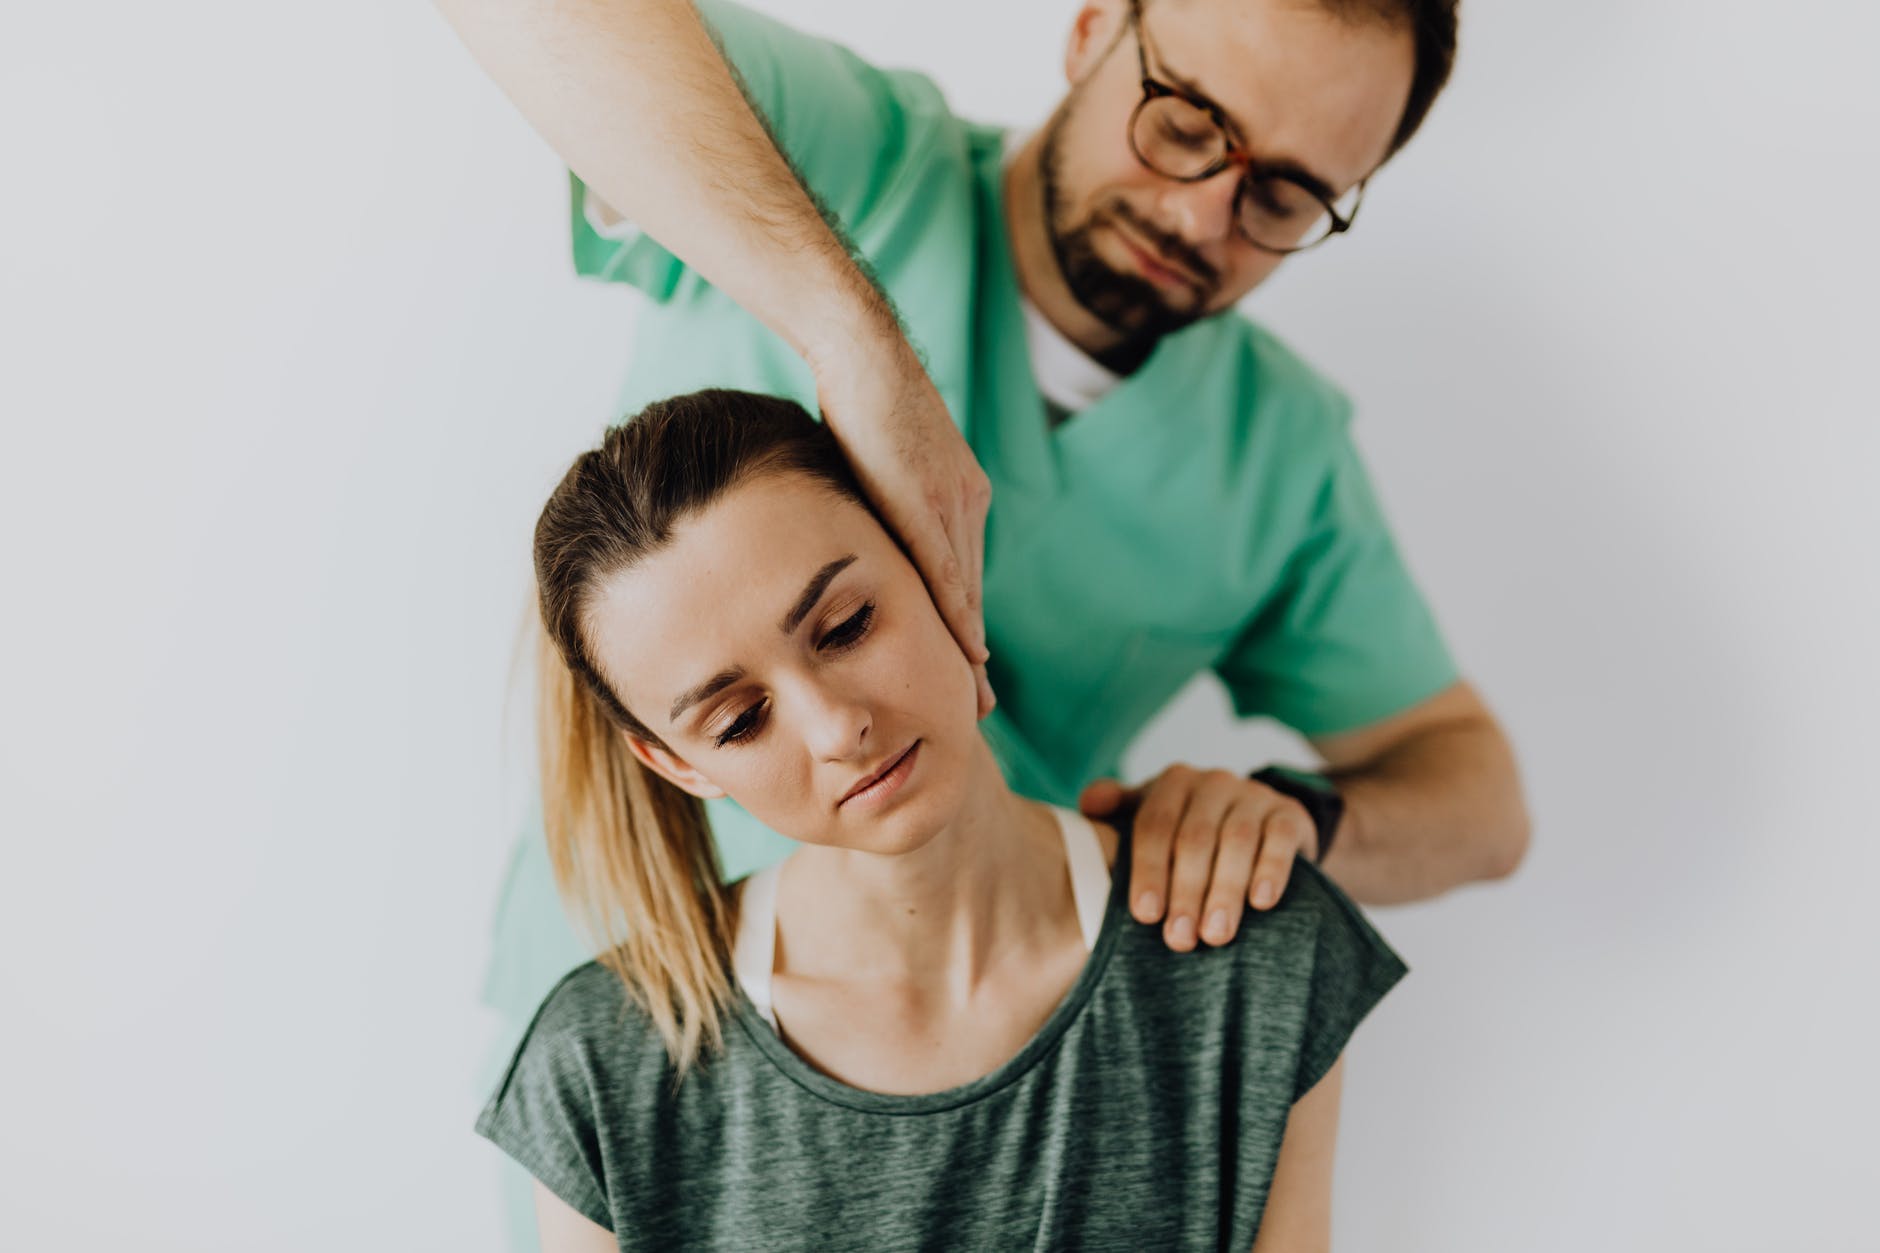 A woman getting a neck adjustment by a chiropractor